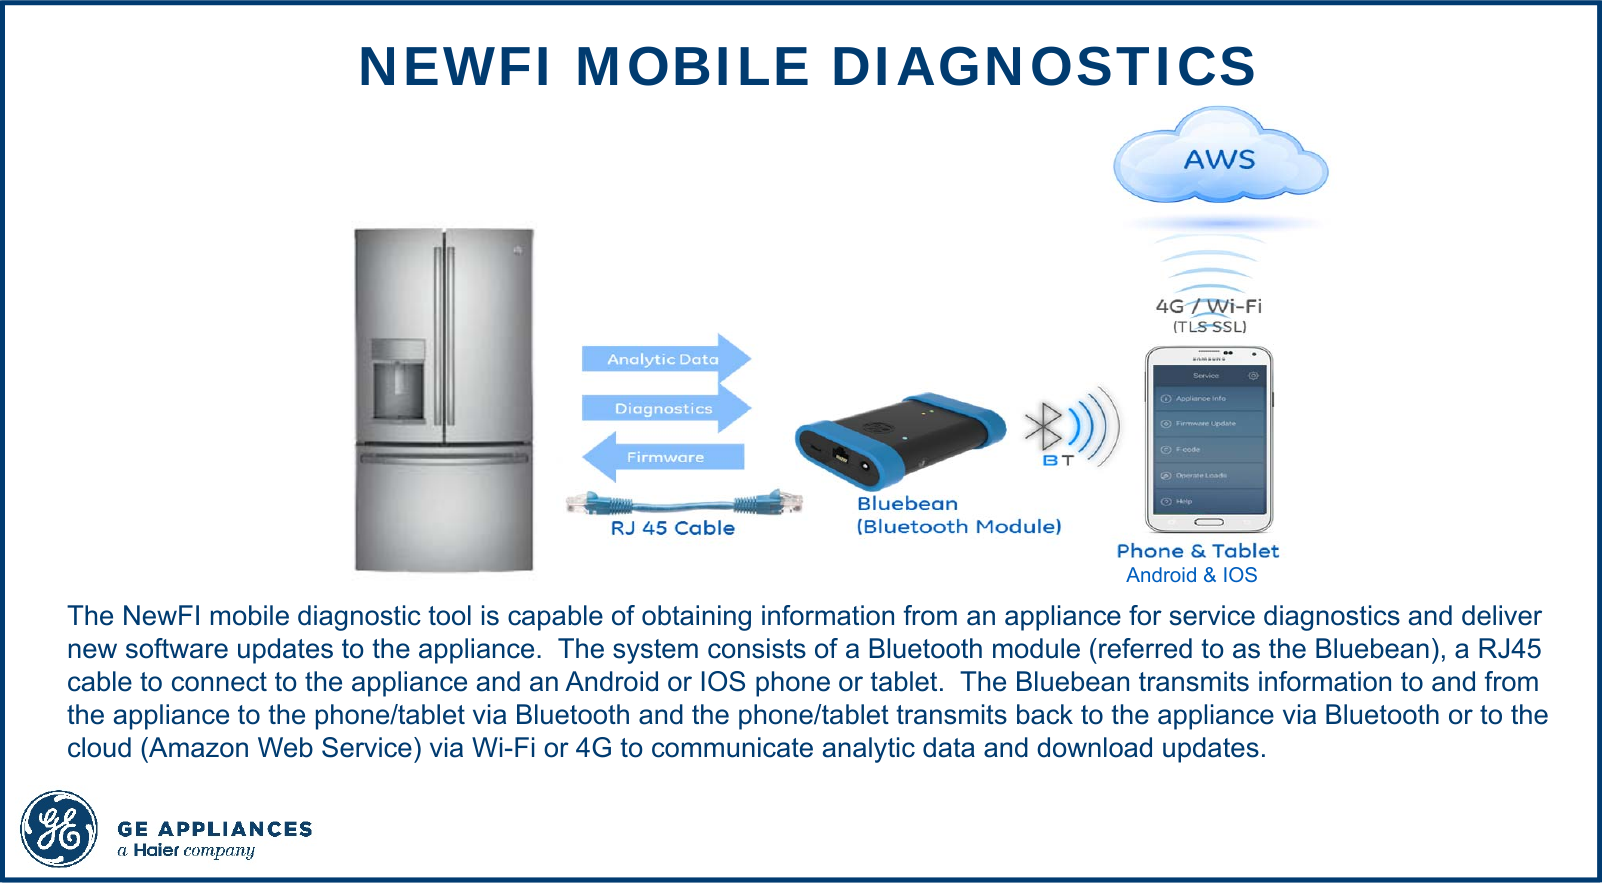 NEWFI MOBILE DIAGNOSTICSAndroid &amp; IOSThe NewFI mobile diagnostic tool is capable of obtaining information from an appliance for service diagnostics and deliver new software updates to the appliance.  The system consists of a Bluetooth module (referred to as the Bluebean), a RJ45 cable to connect to the appliance and an Android or IOS phone or tablet.  The Bluebean transmits information to and from the appliance to the phone/tablet via Bluetooth and the phone/tablet transmits back to the appliance via Bluetooth or to the cloud (Amazon Web Service) via Wi-Fi or 4G to communicate analytic data and download updates.        